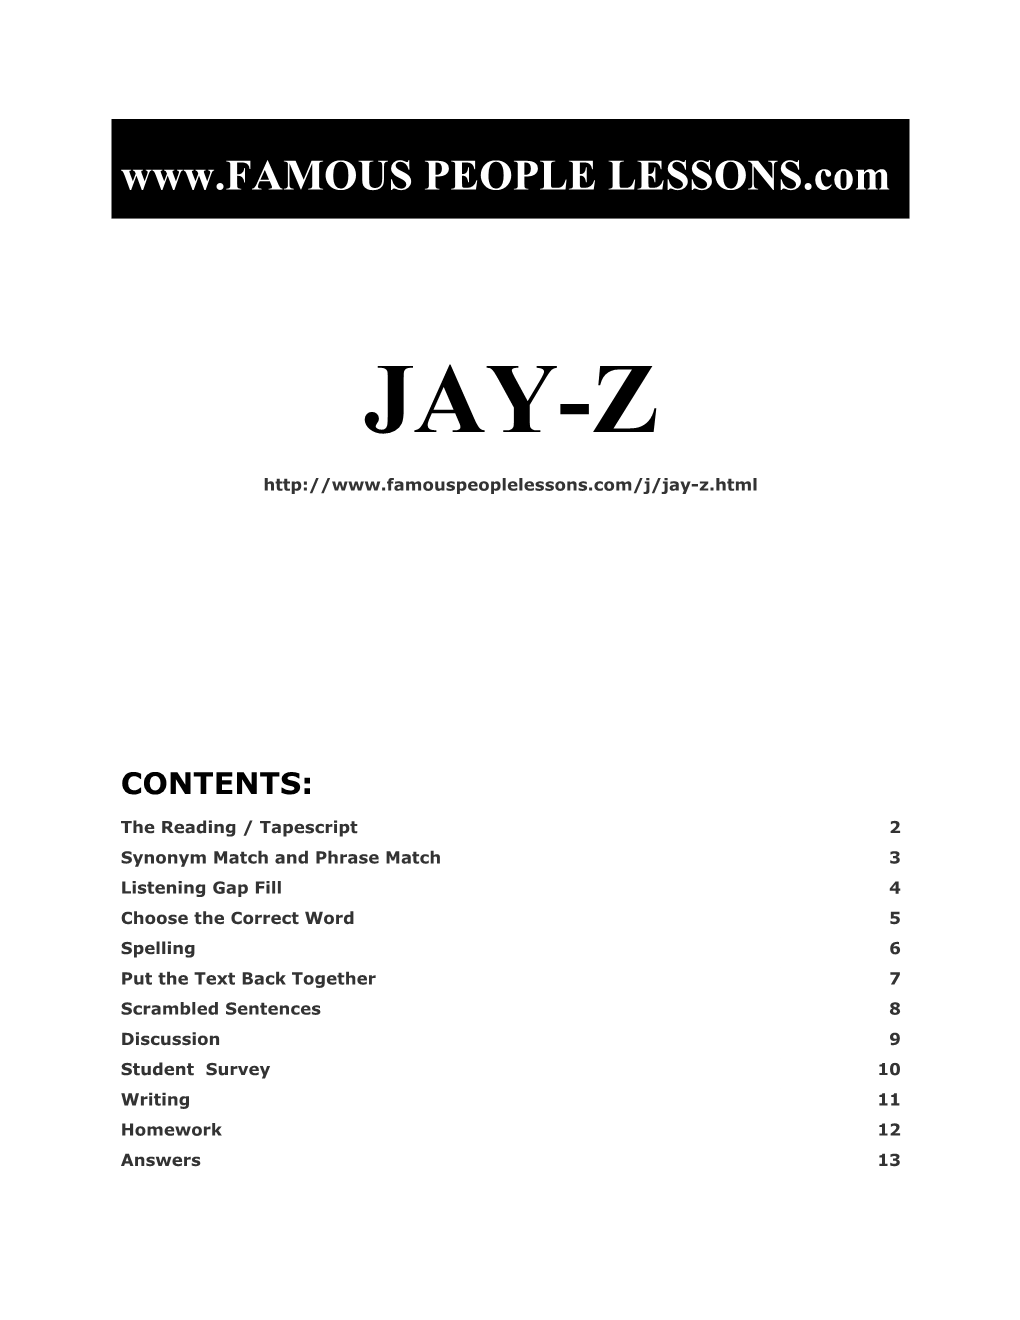 Famous People Lessons - Jay-Z